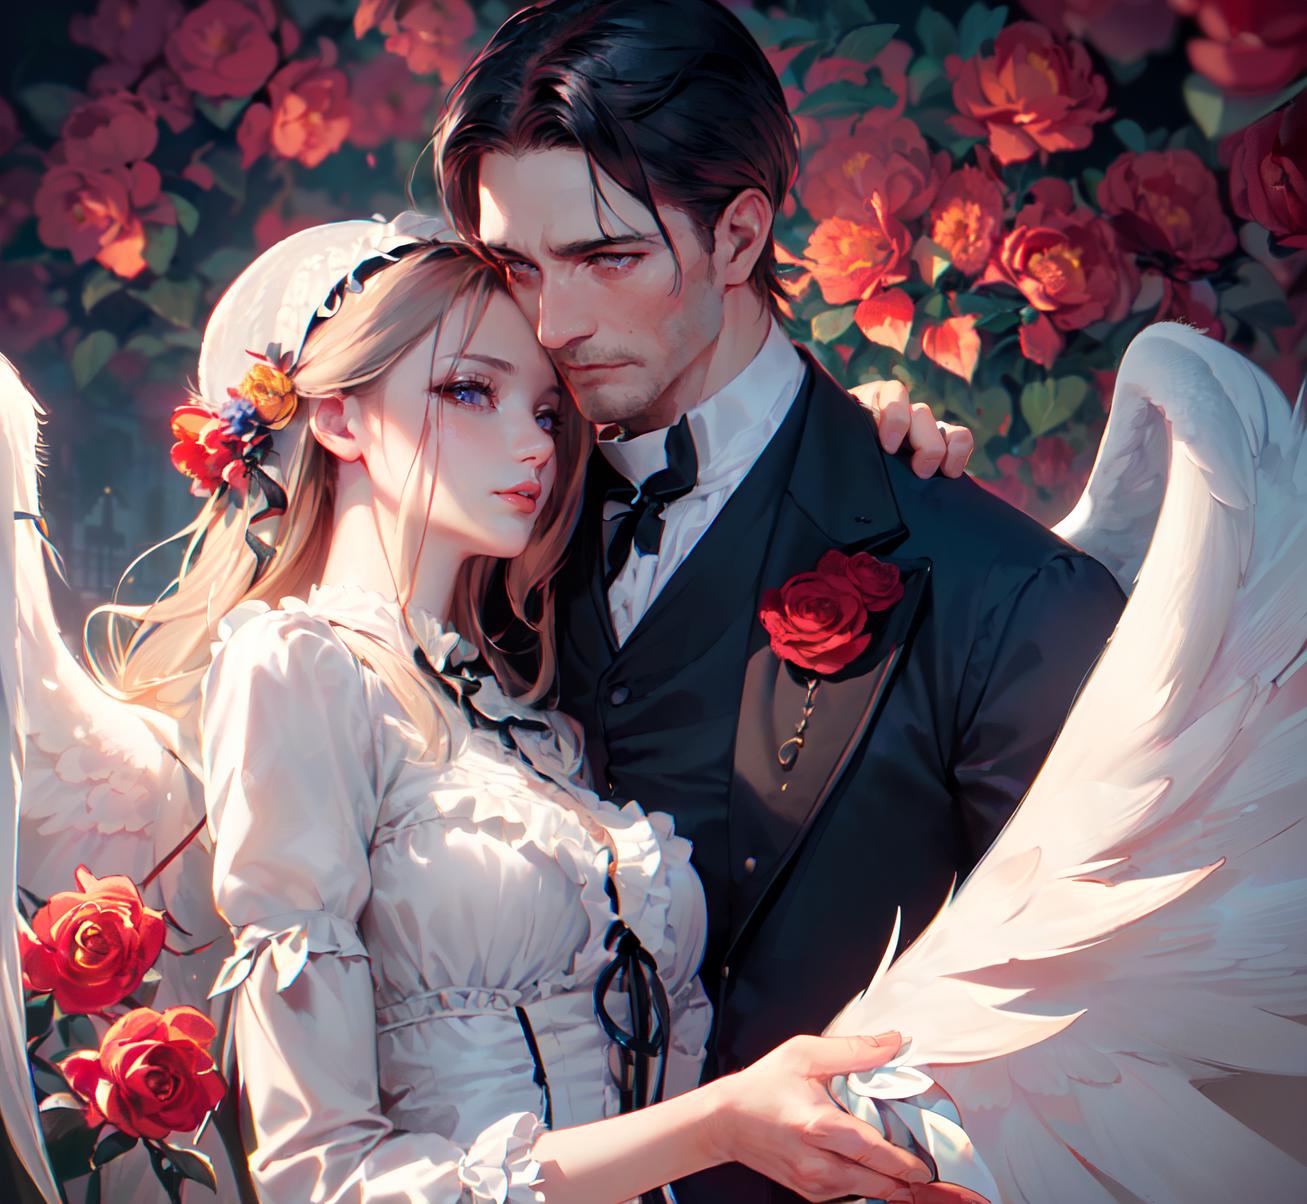 A Bride and Groom Art Illustration in a Garden Setting